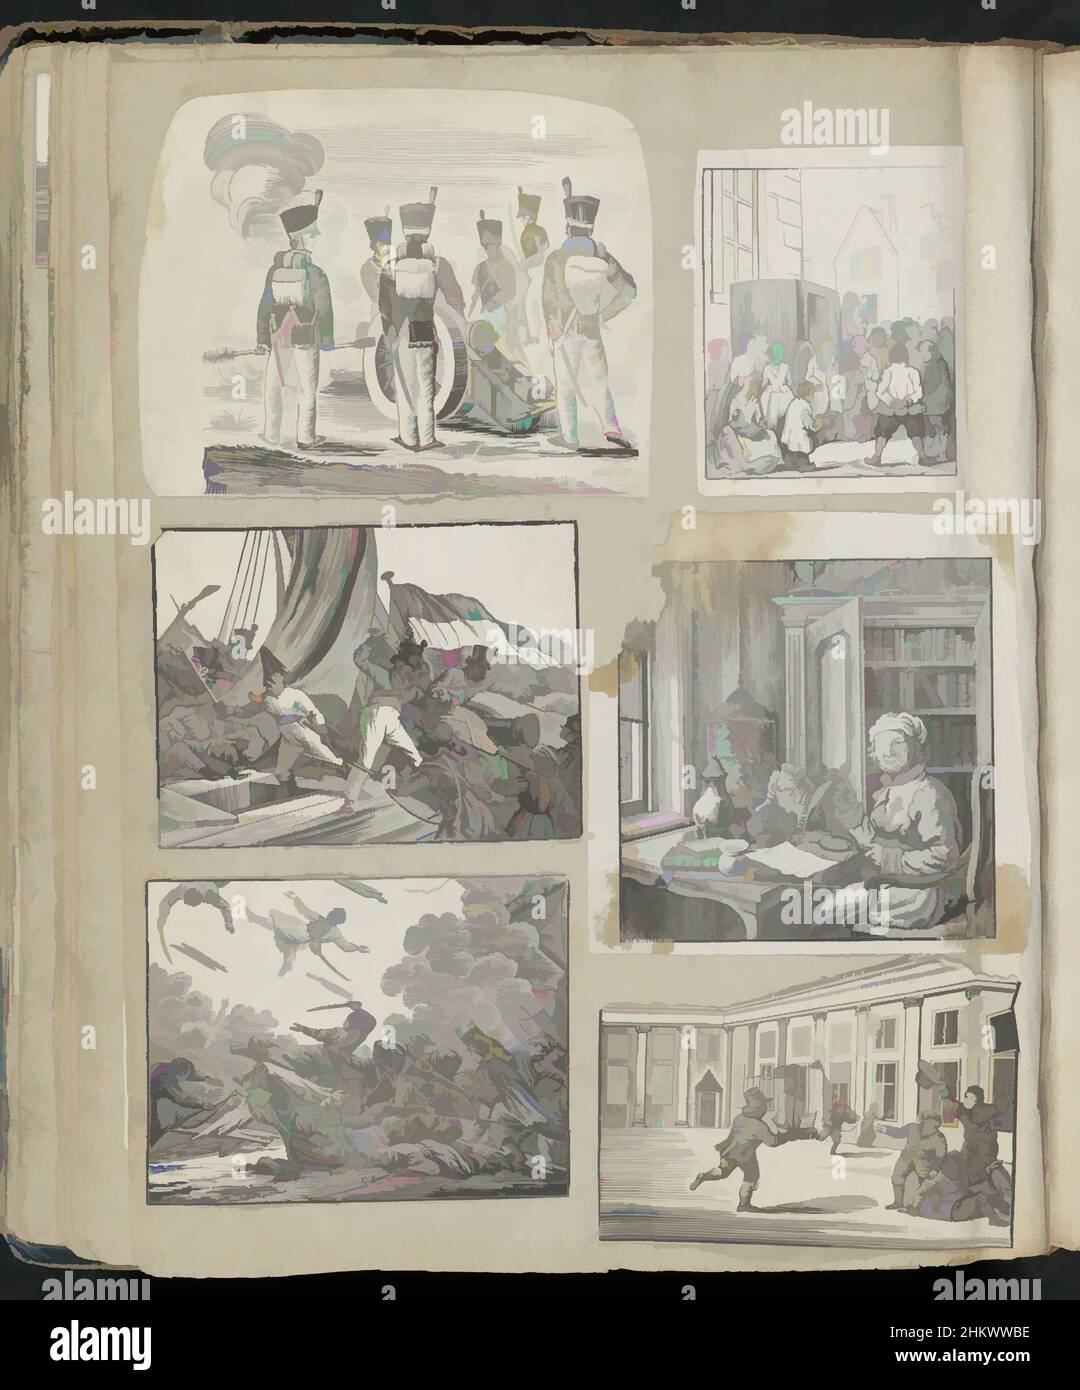 Art inspired by Album sheet with various representations, Album sheet with 6 cut-out representations from mainly folk prints, of, among others, soldiers firing a cannon, a crowd in the street, a scholar in his study and children playing., print maker: Alexander Cranendoncq, Nijmegen, Classic works modernized by Artotop with a splash of modernity. Shapes, color and value, eye-catching visual impact on art. Emotions through freedom of artworks in a contemporary way. A timeless message pursuing a wildly creative new direction. Artists turning to the digital medium and creating the Artotop NFT Stock Photo